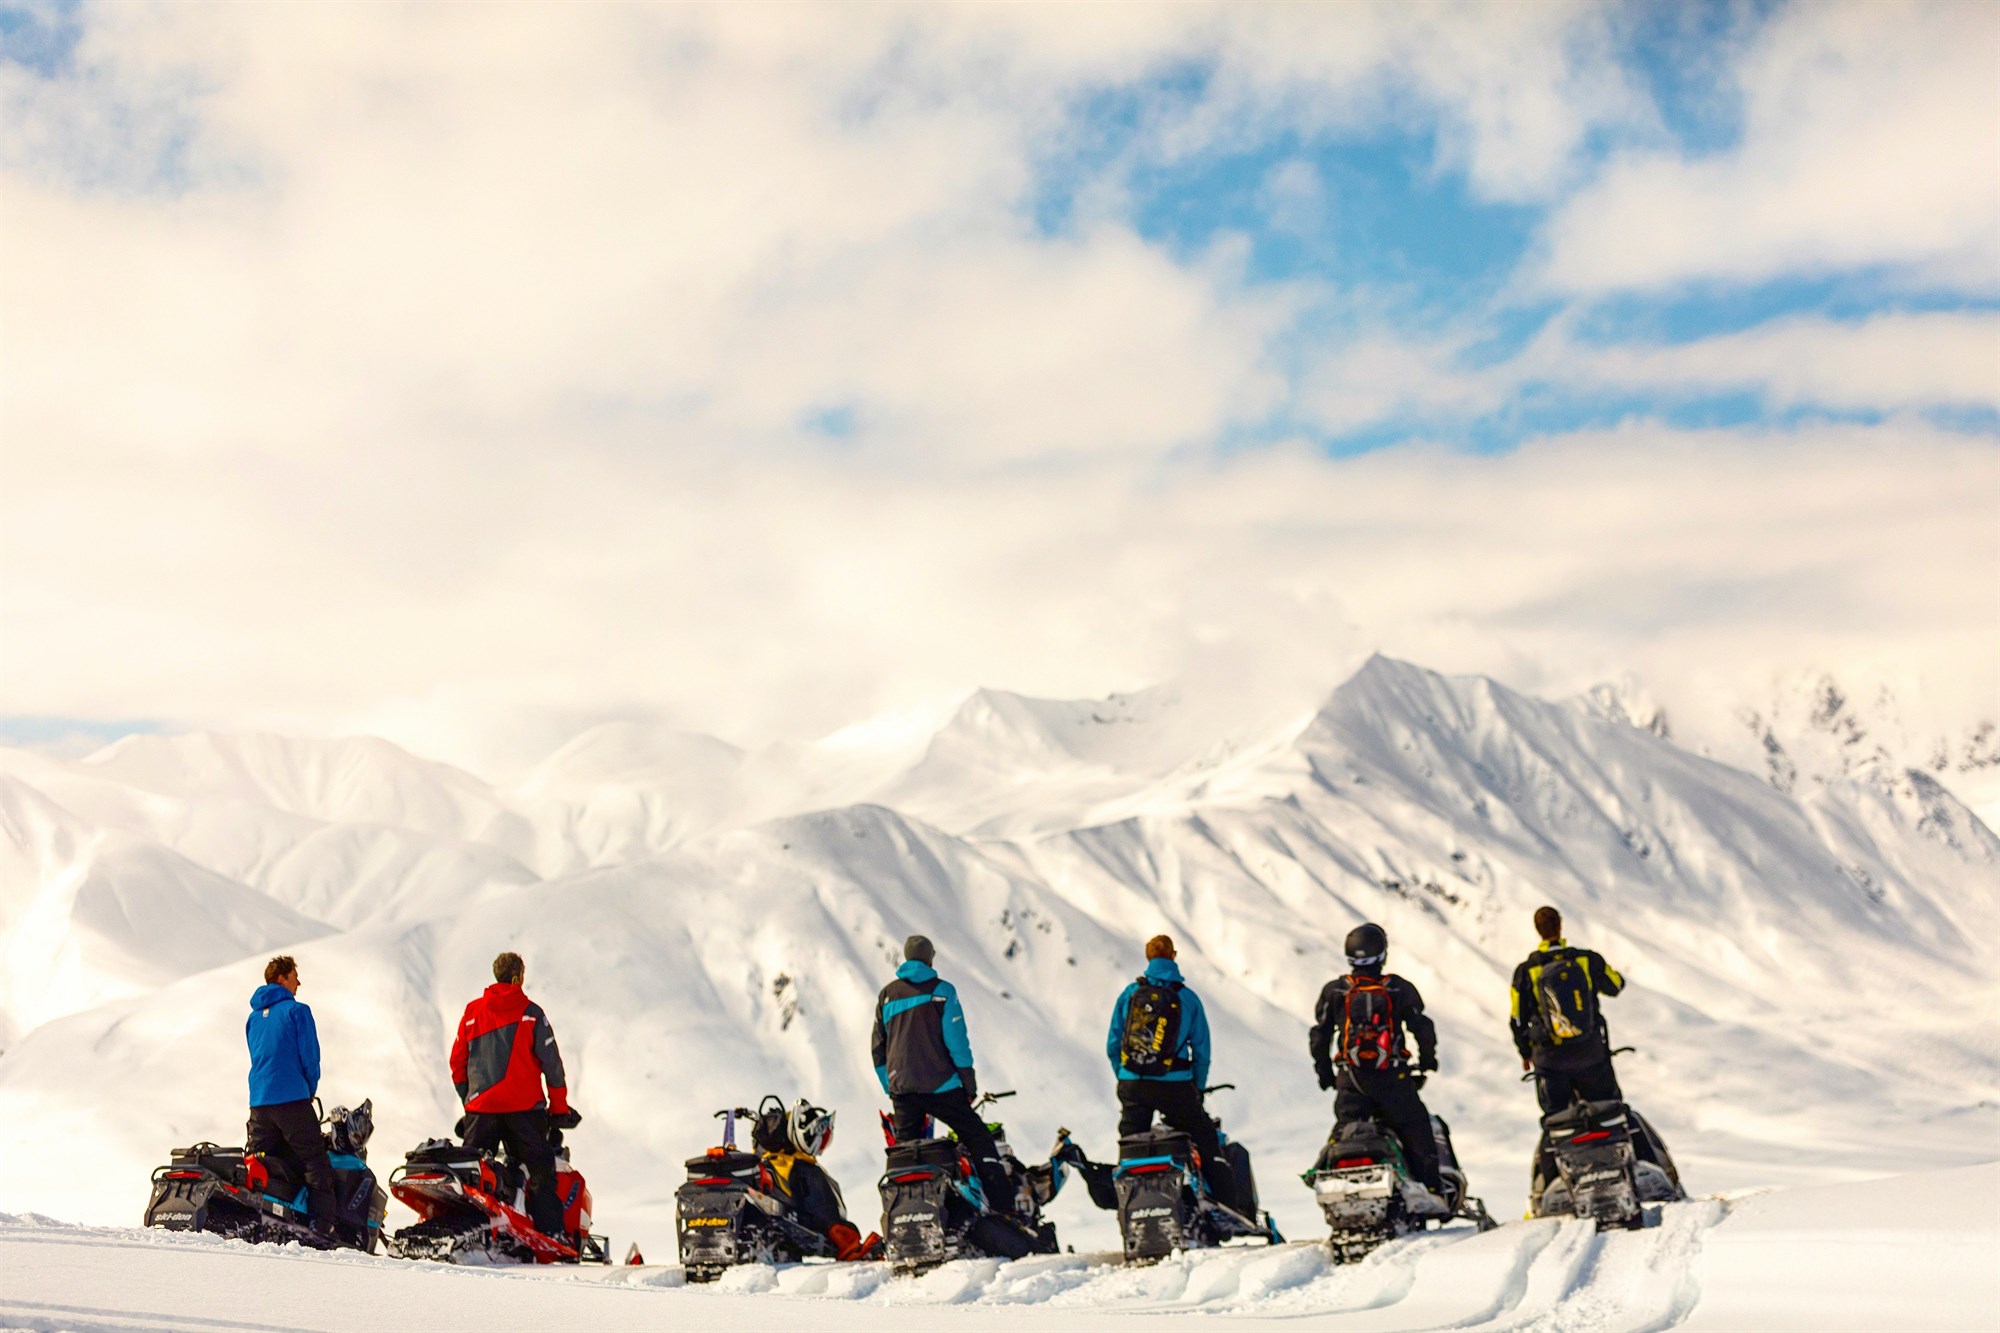 Row of people on snowmobiles looking at a snowy mountain range.